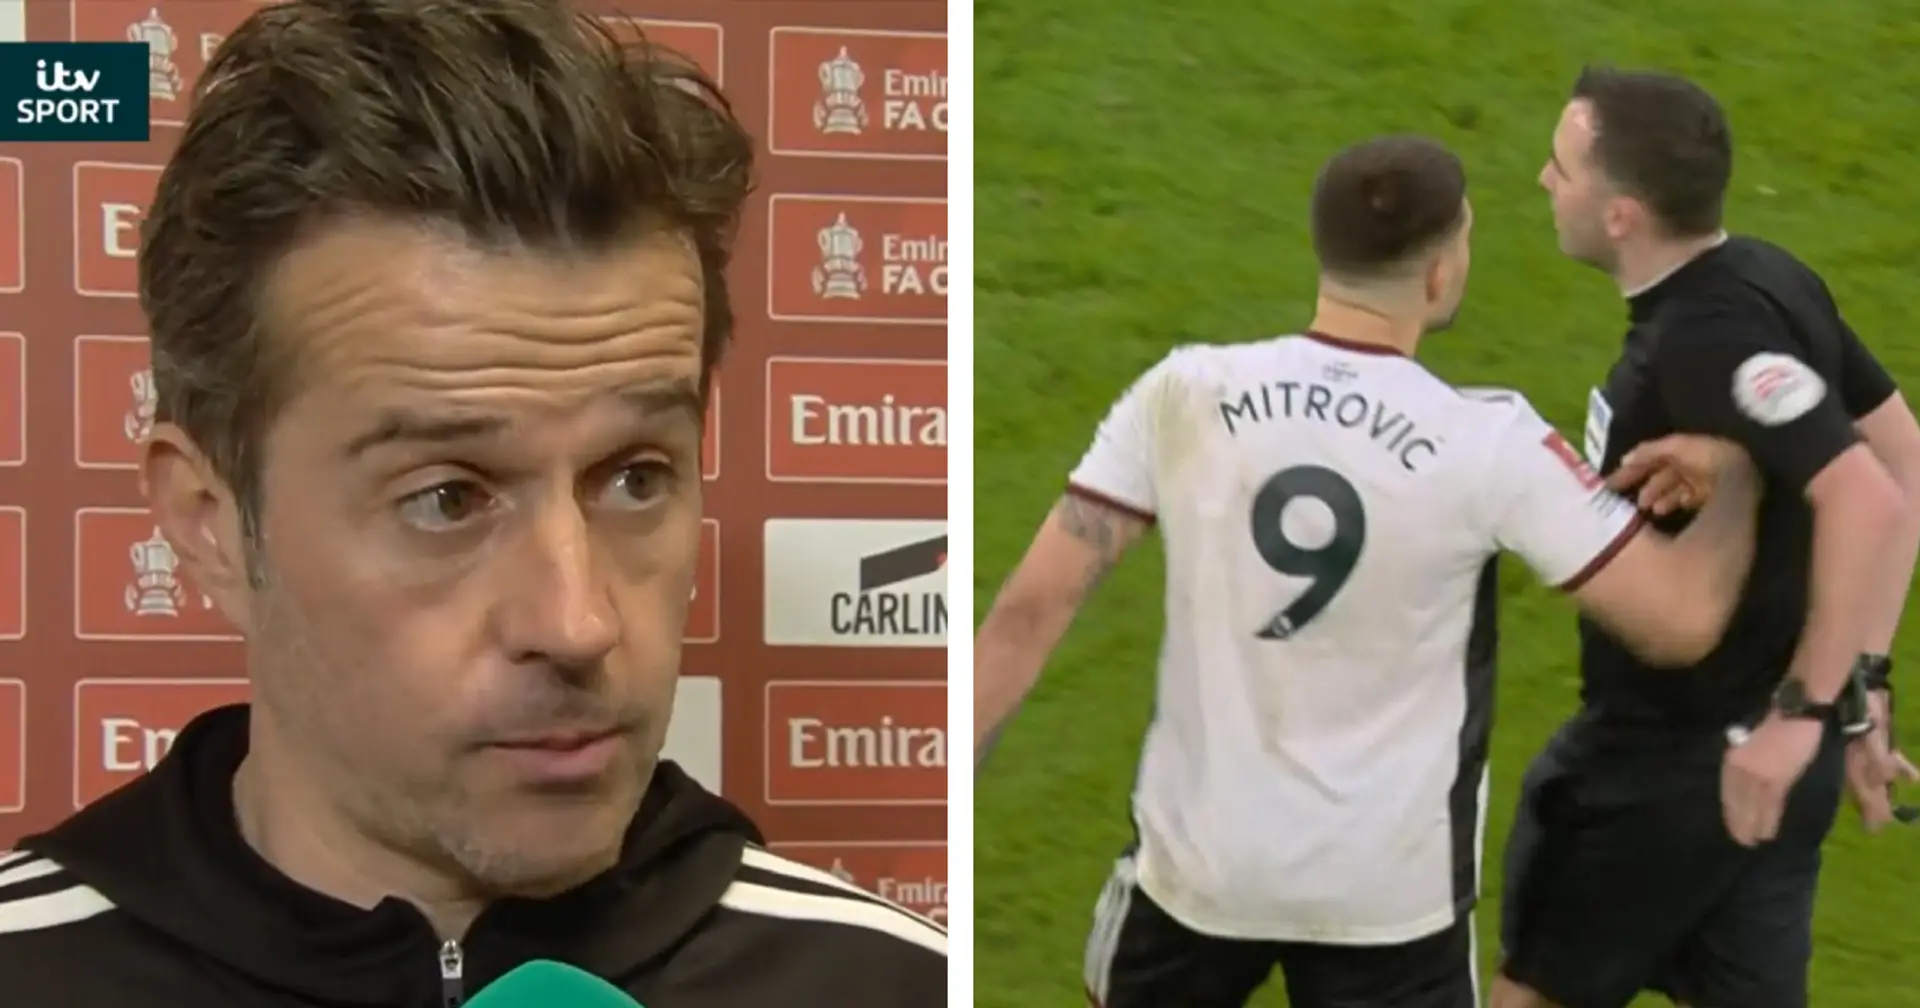 'Difficult for us to understand': Fulham boss Silva slams referees for some decisions vs United